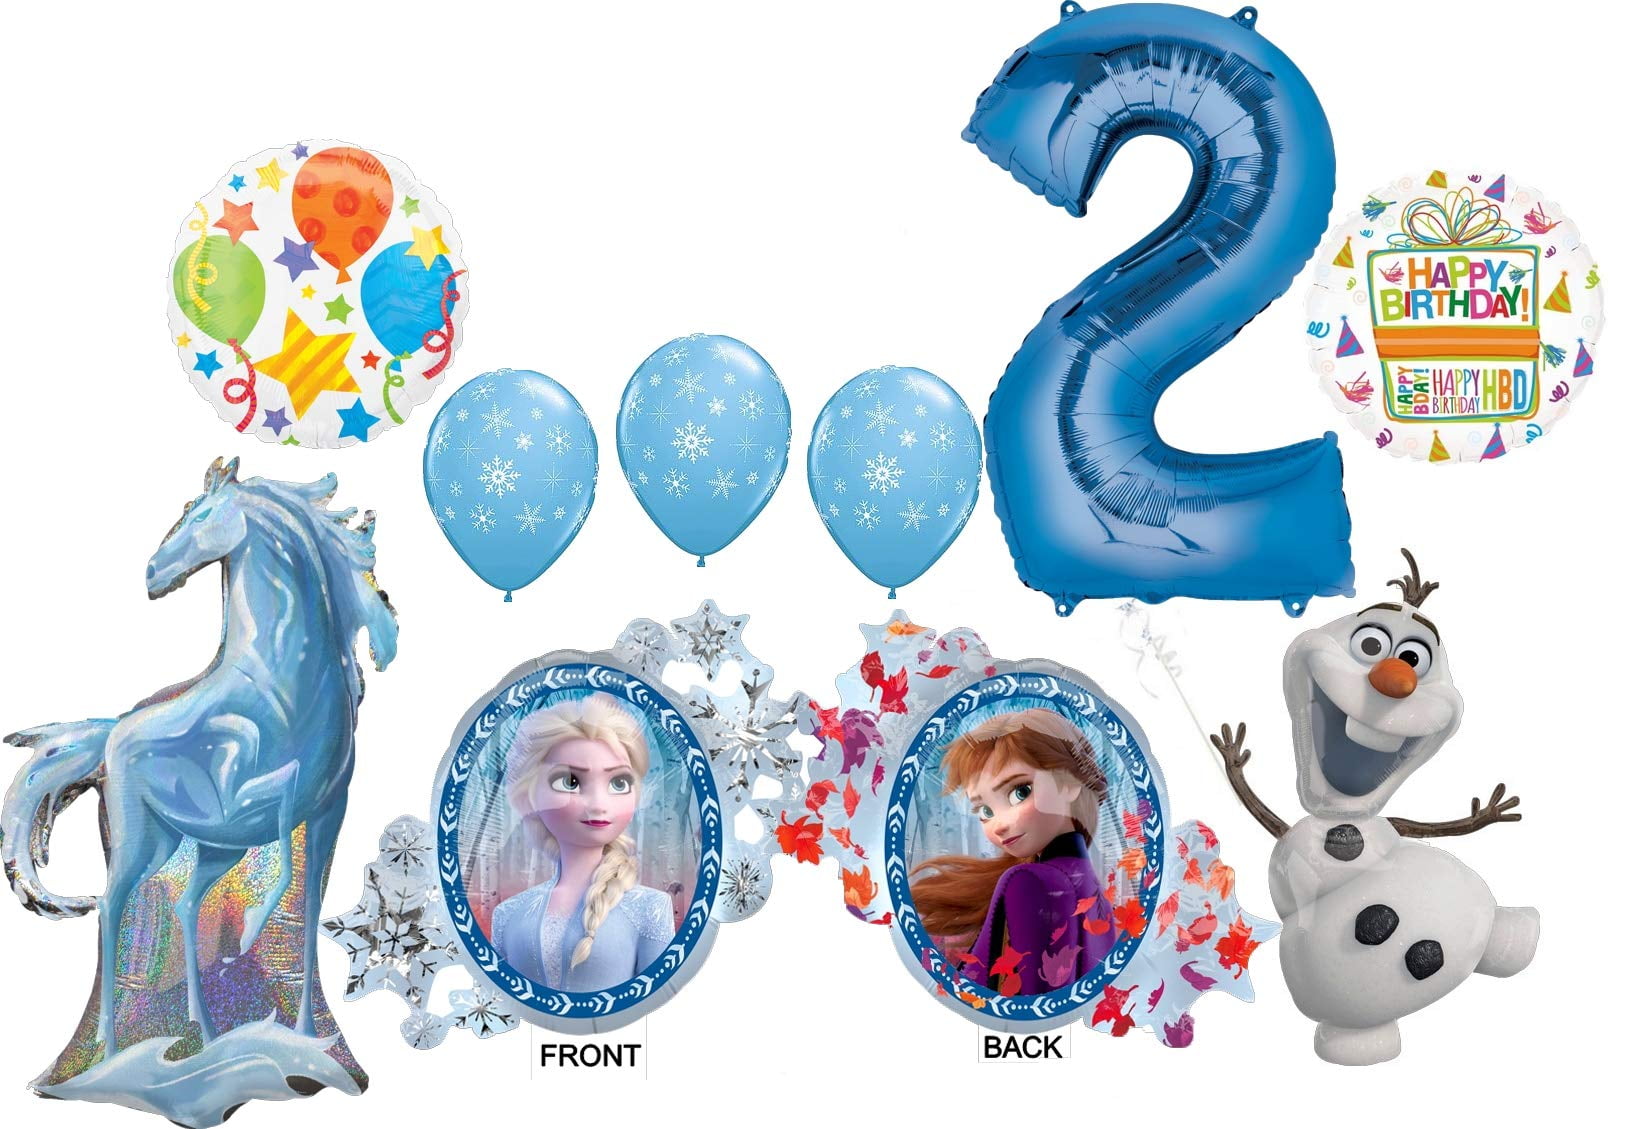 Blue Number 2 34" Balloon Birthday Party Decorations 2nd #2 